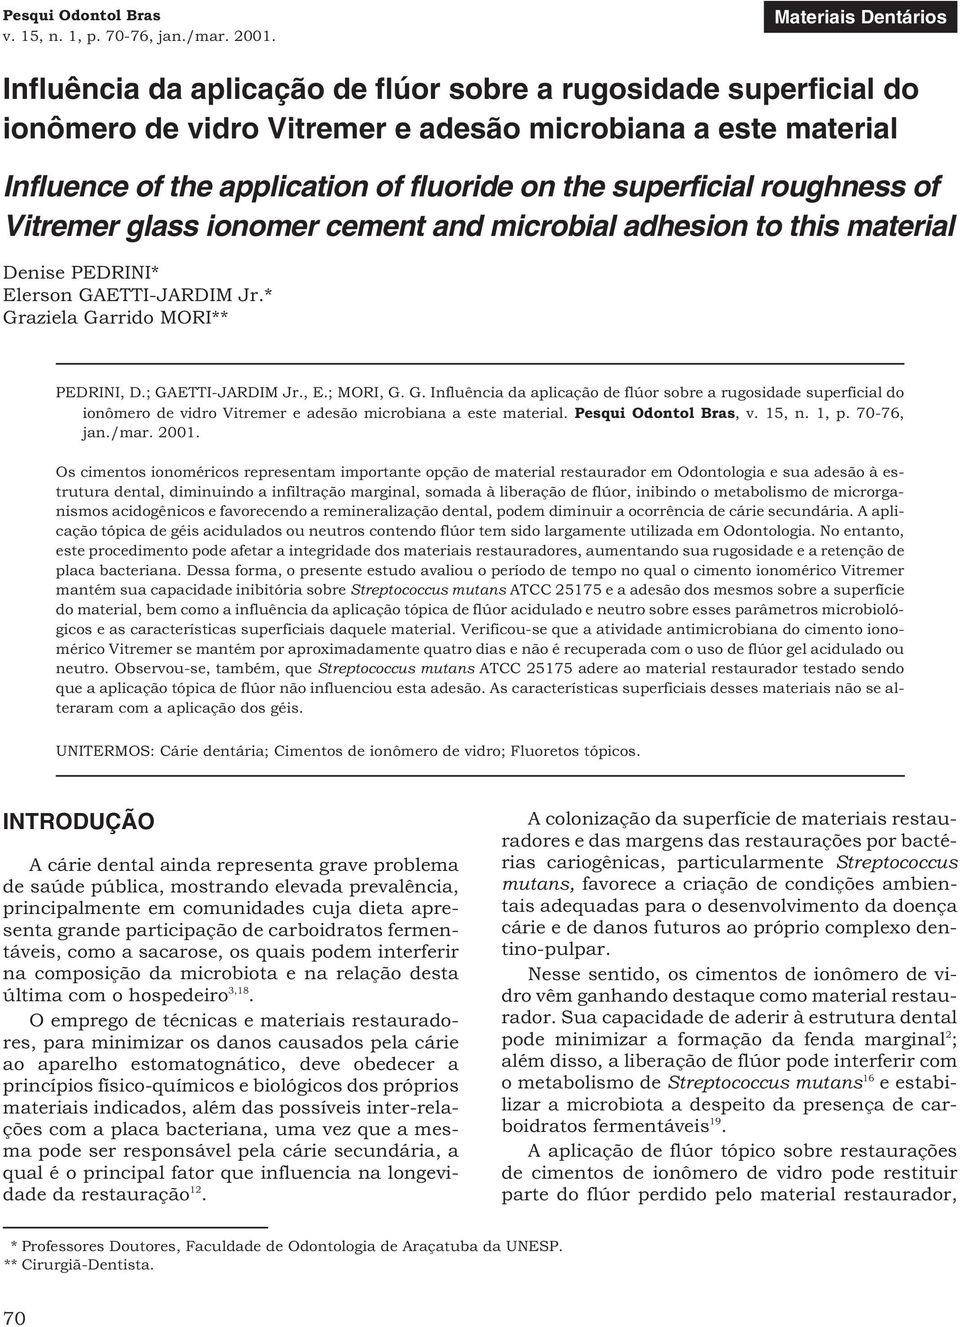 superficial roughness of Vitremer glass ionomer cement and microbial adhesion to this material Denise PEDRINI* Elerson GAETTI-JARDIM Jr.* Graziela Garrido MORI** PEDRINI, D.; GAETTI-JARDIM Jr., E.